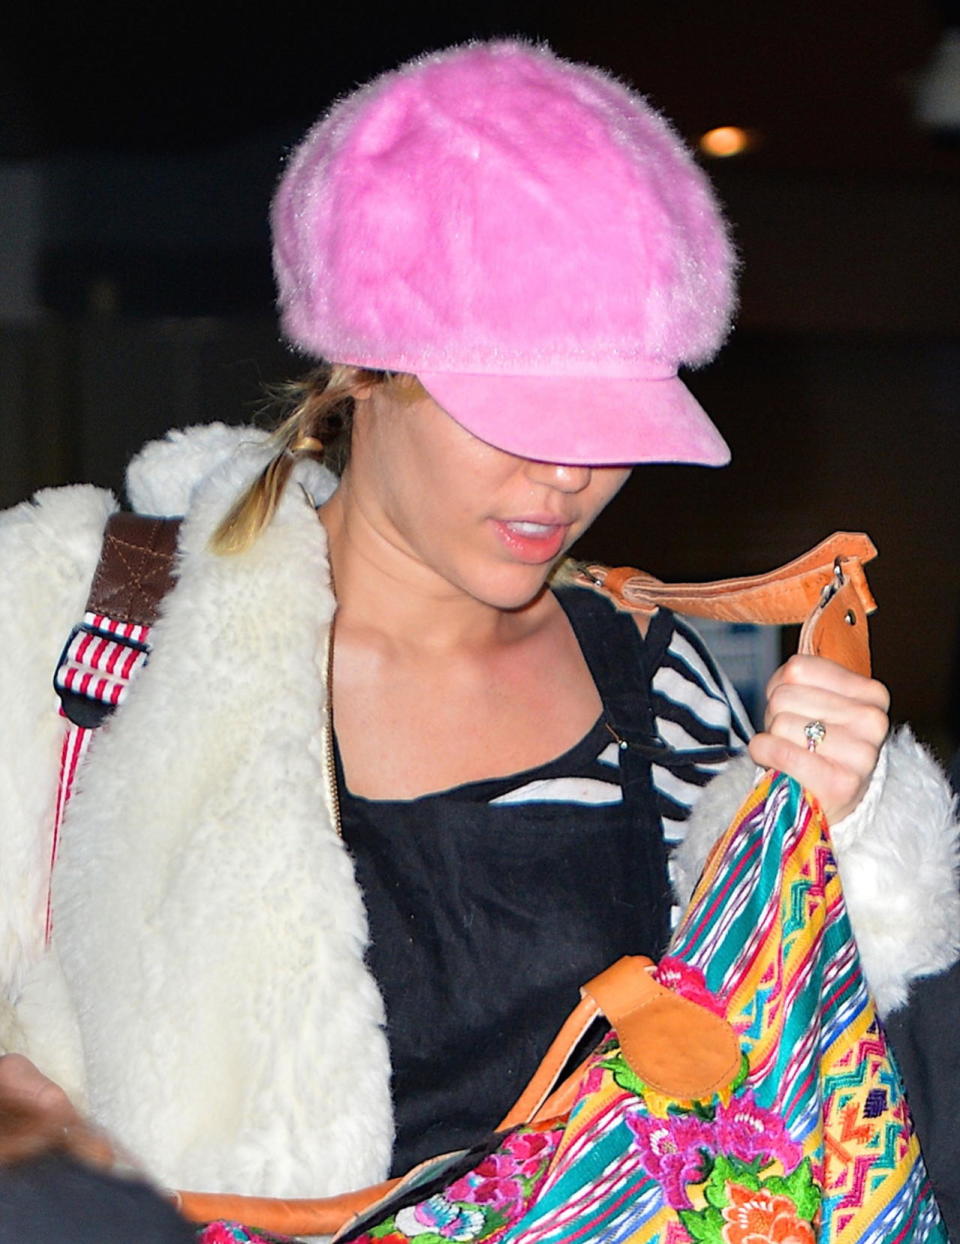 Miley Cyrus was spied at JFK airport rocking some suspicious-looking bling on January 17, 2016